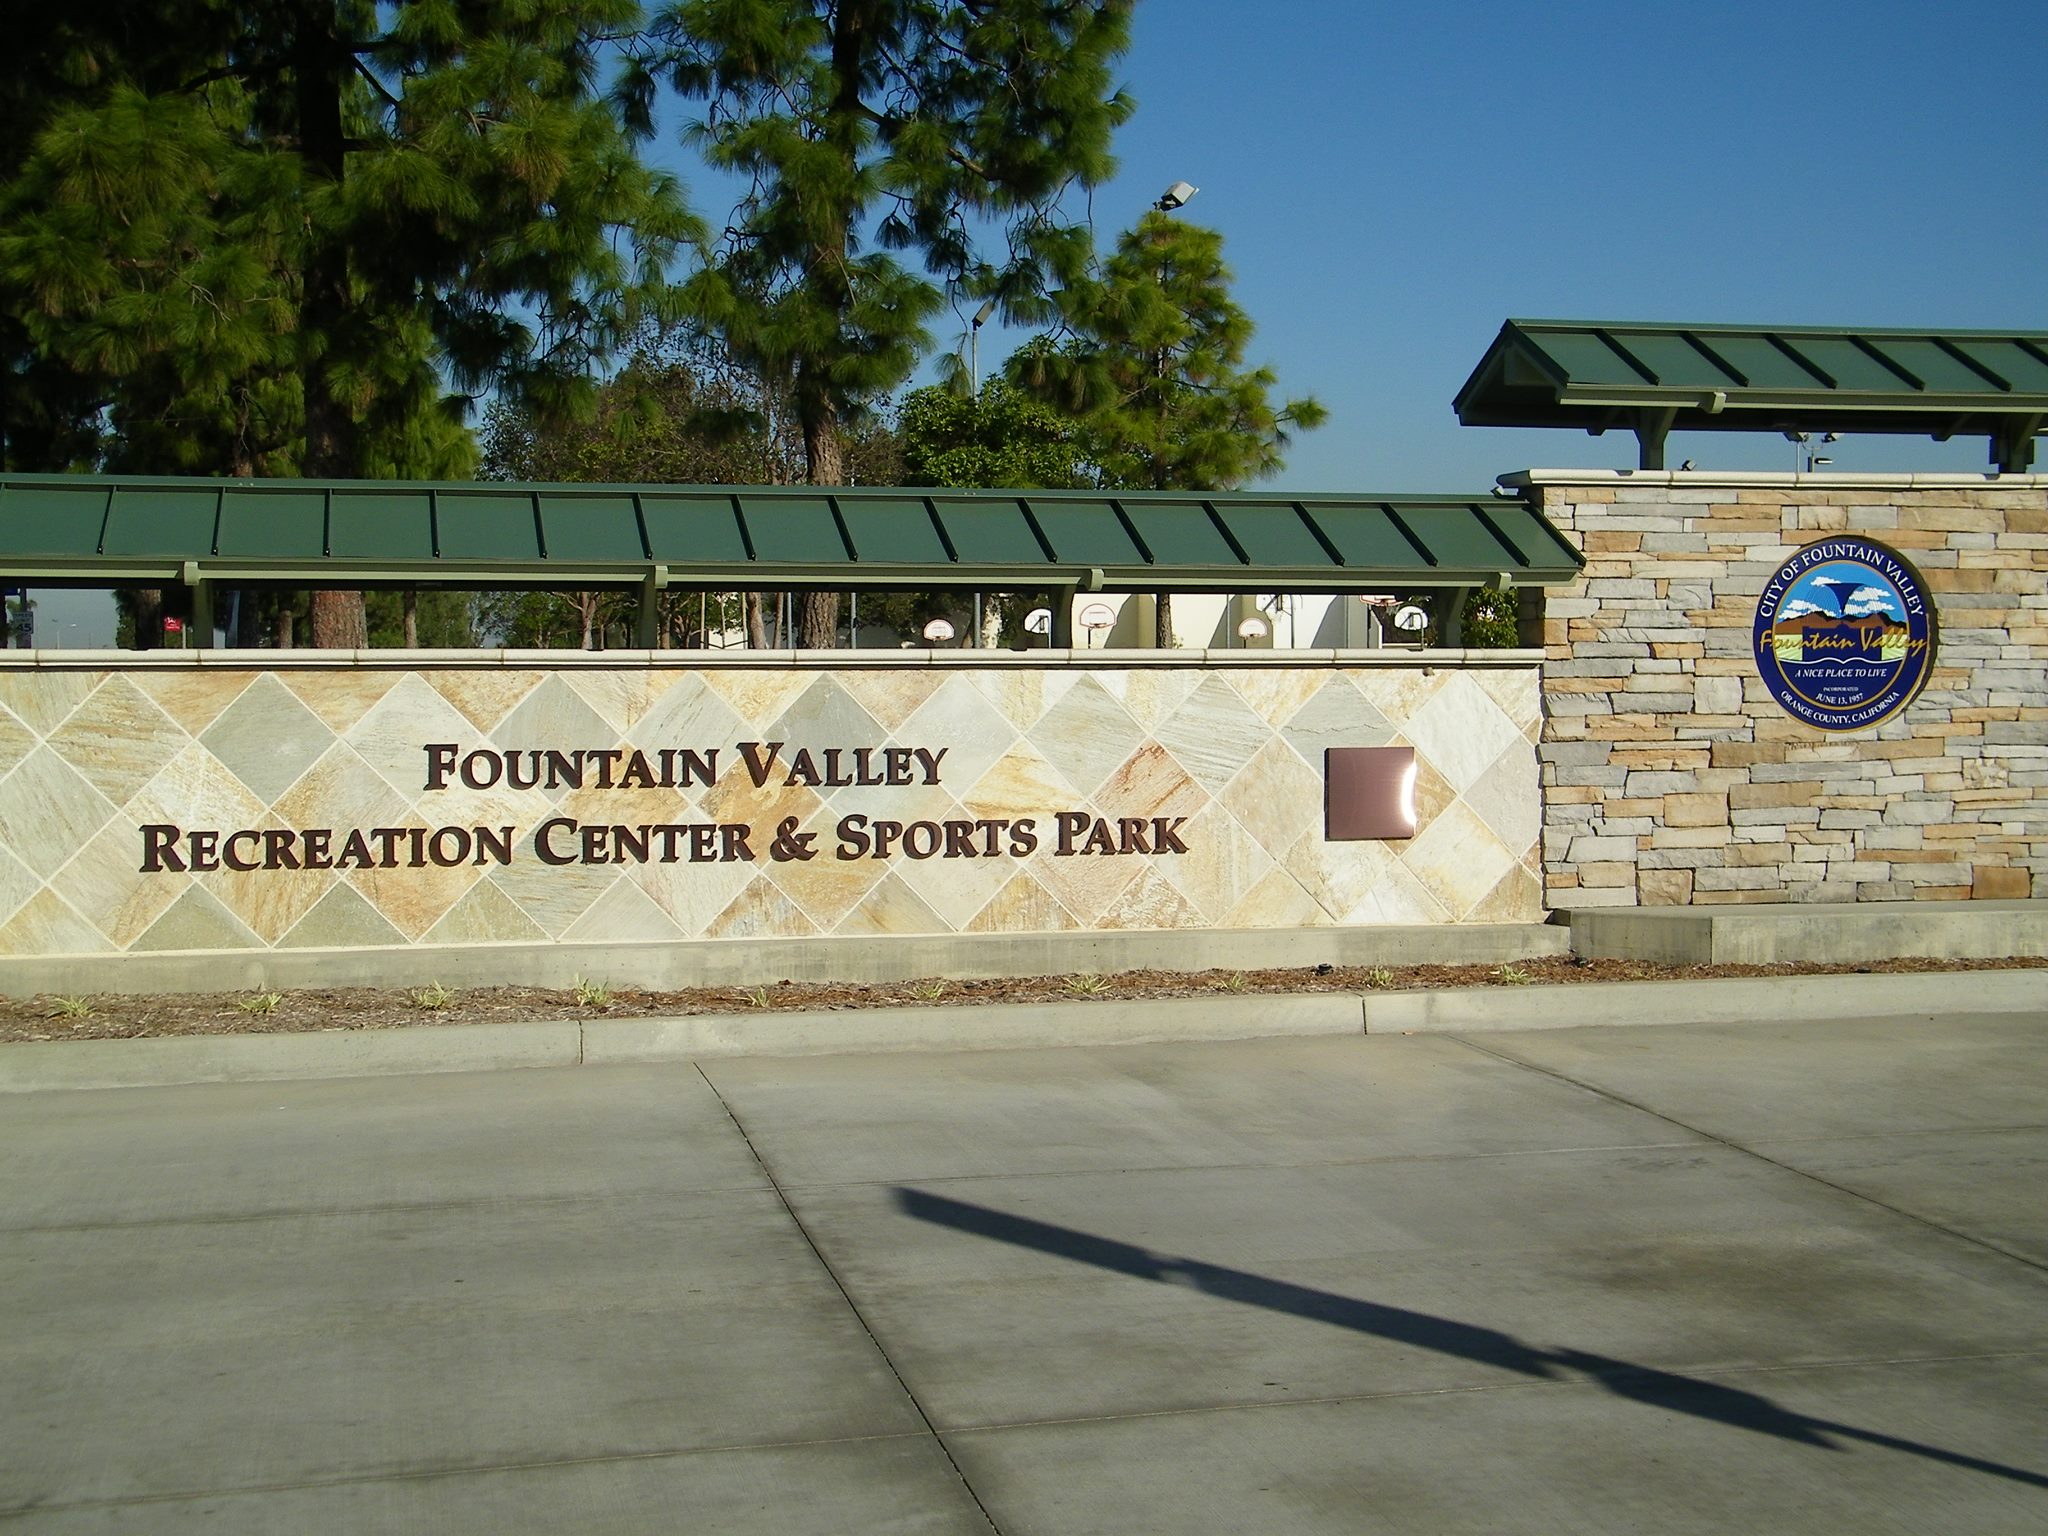 Fountain Valley Recreation Center & Sports Park - SparkOC.com - The happening place for Arts happenings in the O.C.